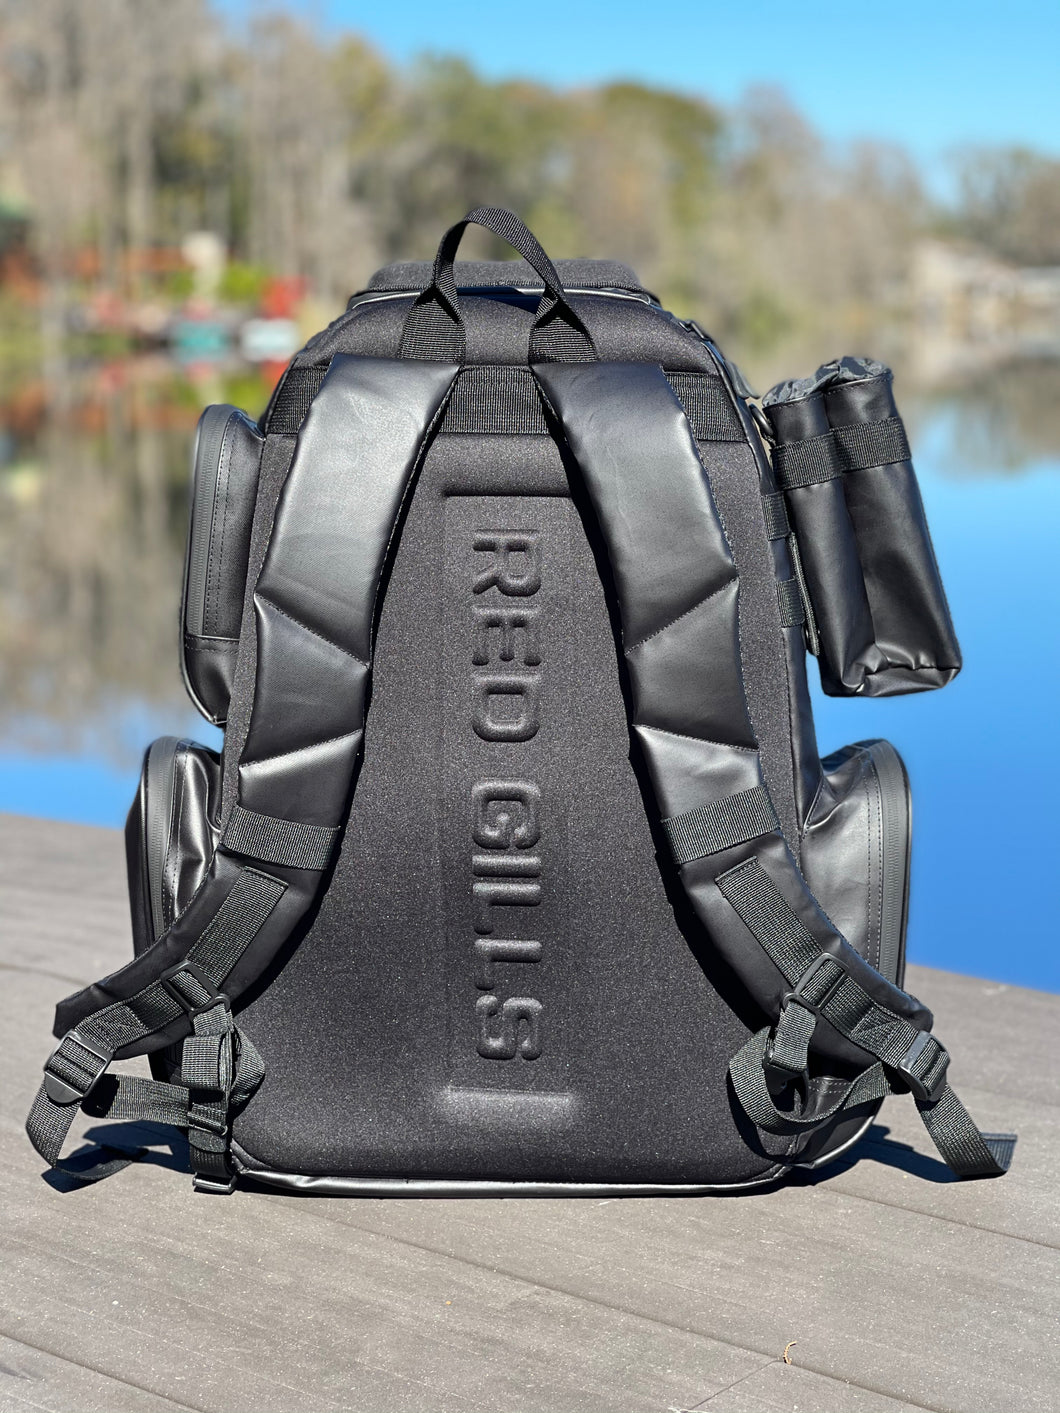 P3 Tackle Backpack – RED GILLS